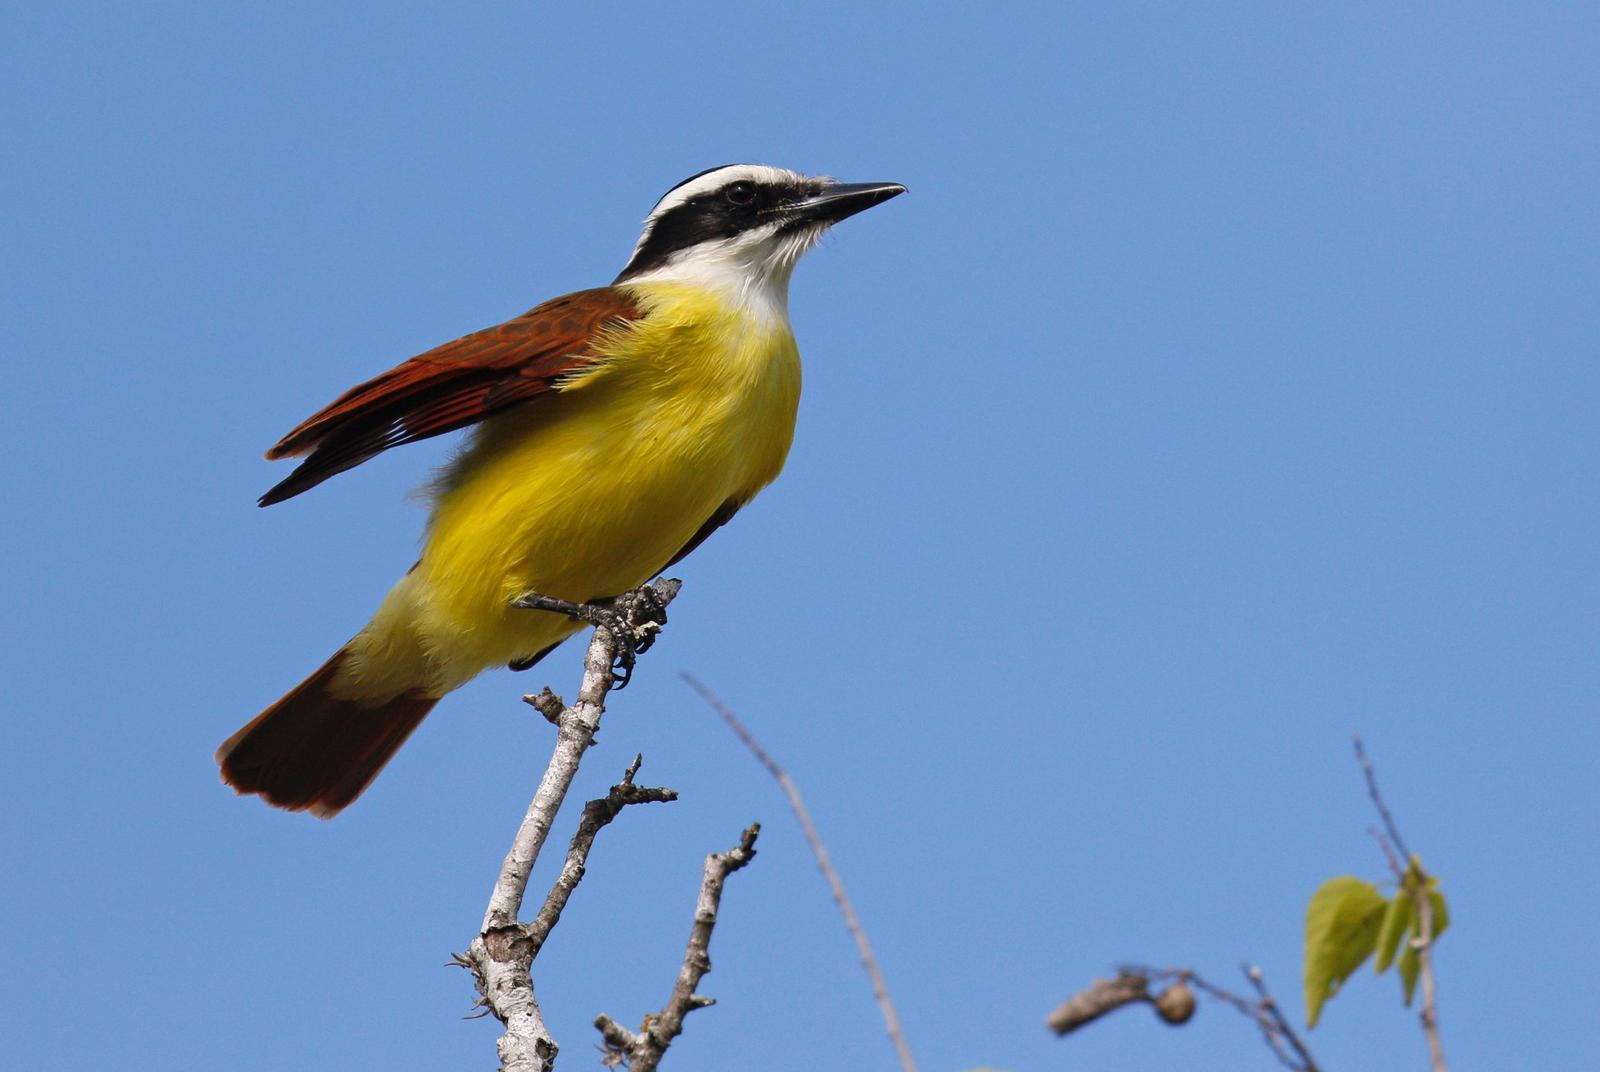 Great Kiskadee Photo by Emily Willoughby